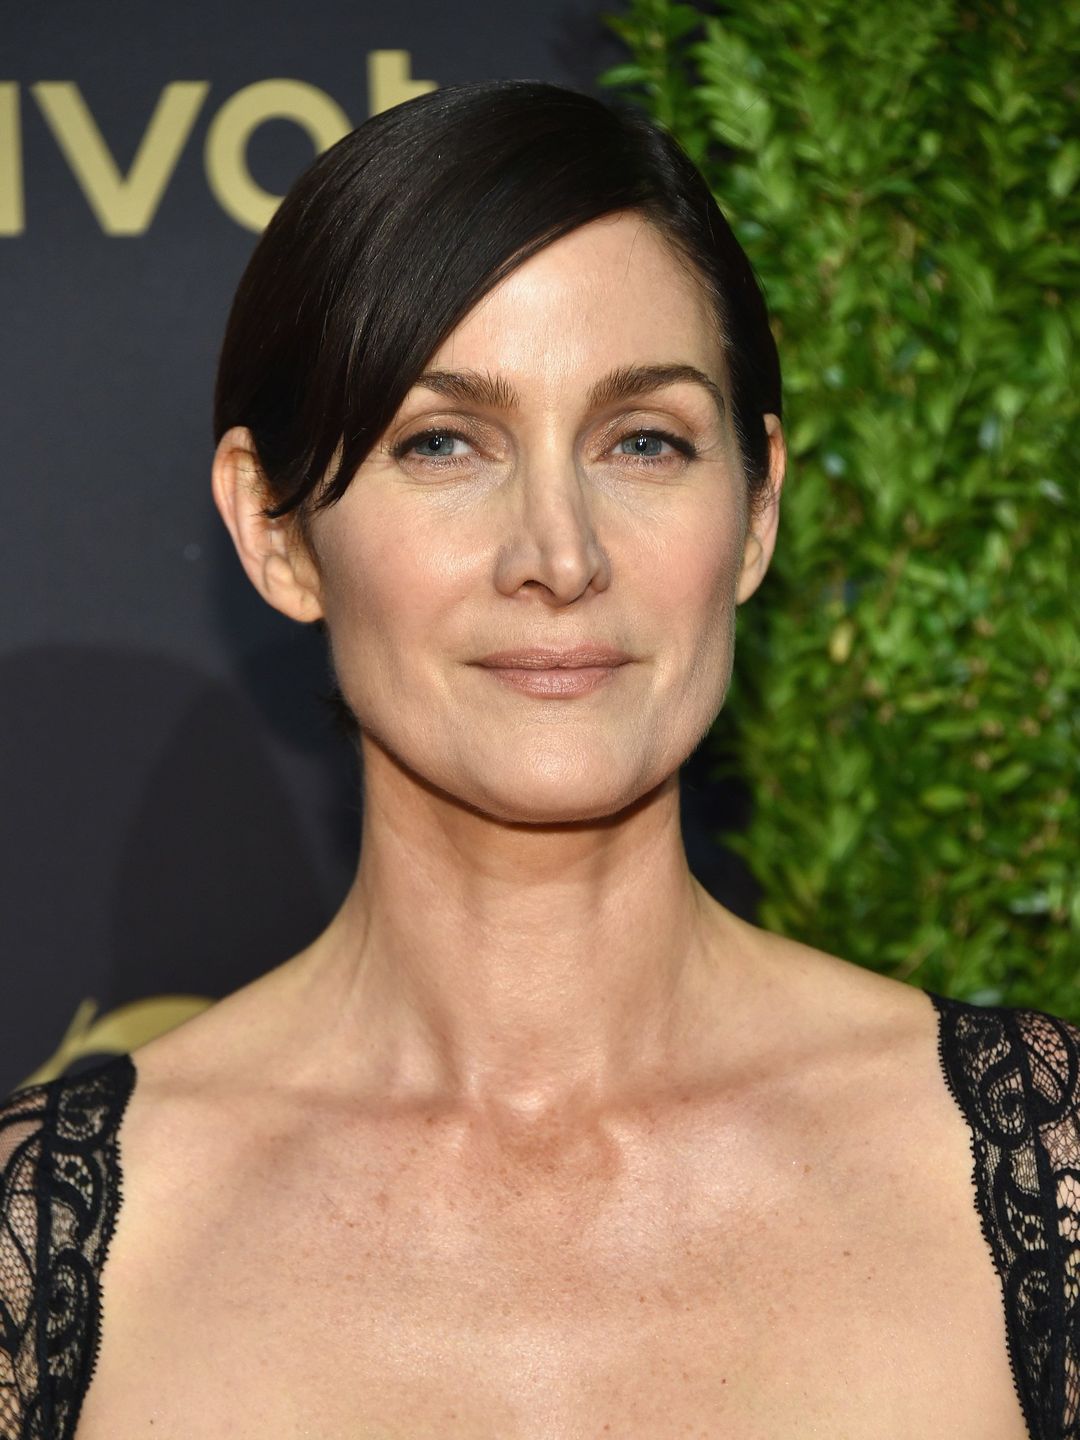 Carrie-Anne Moss place of birth